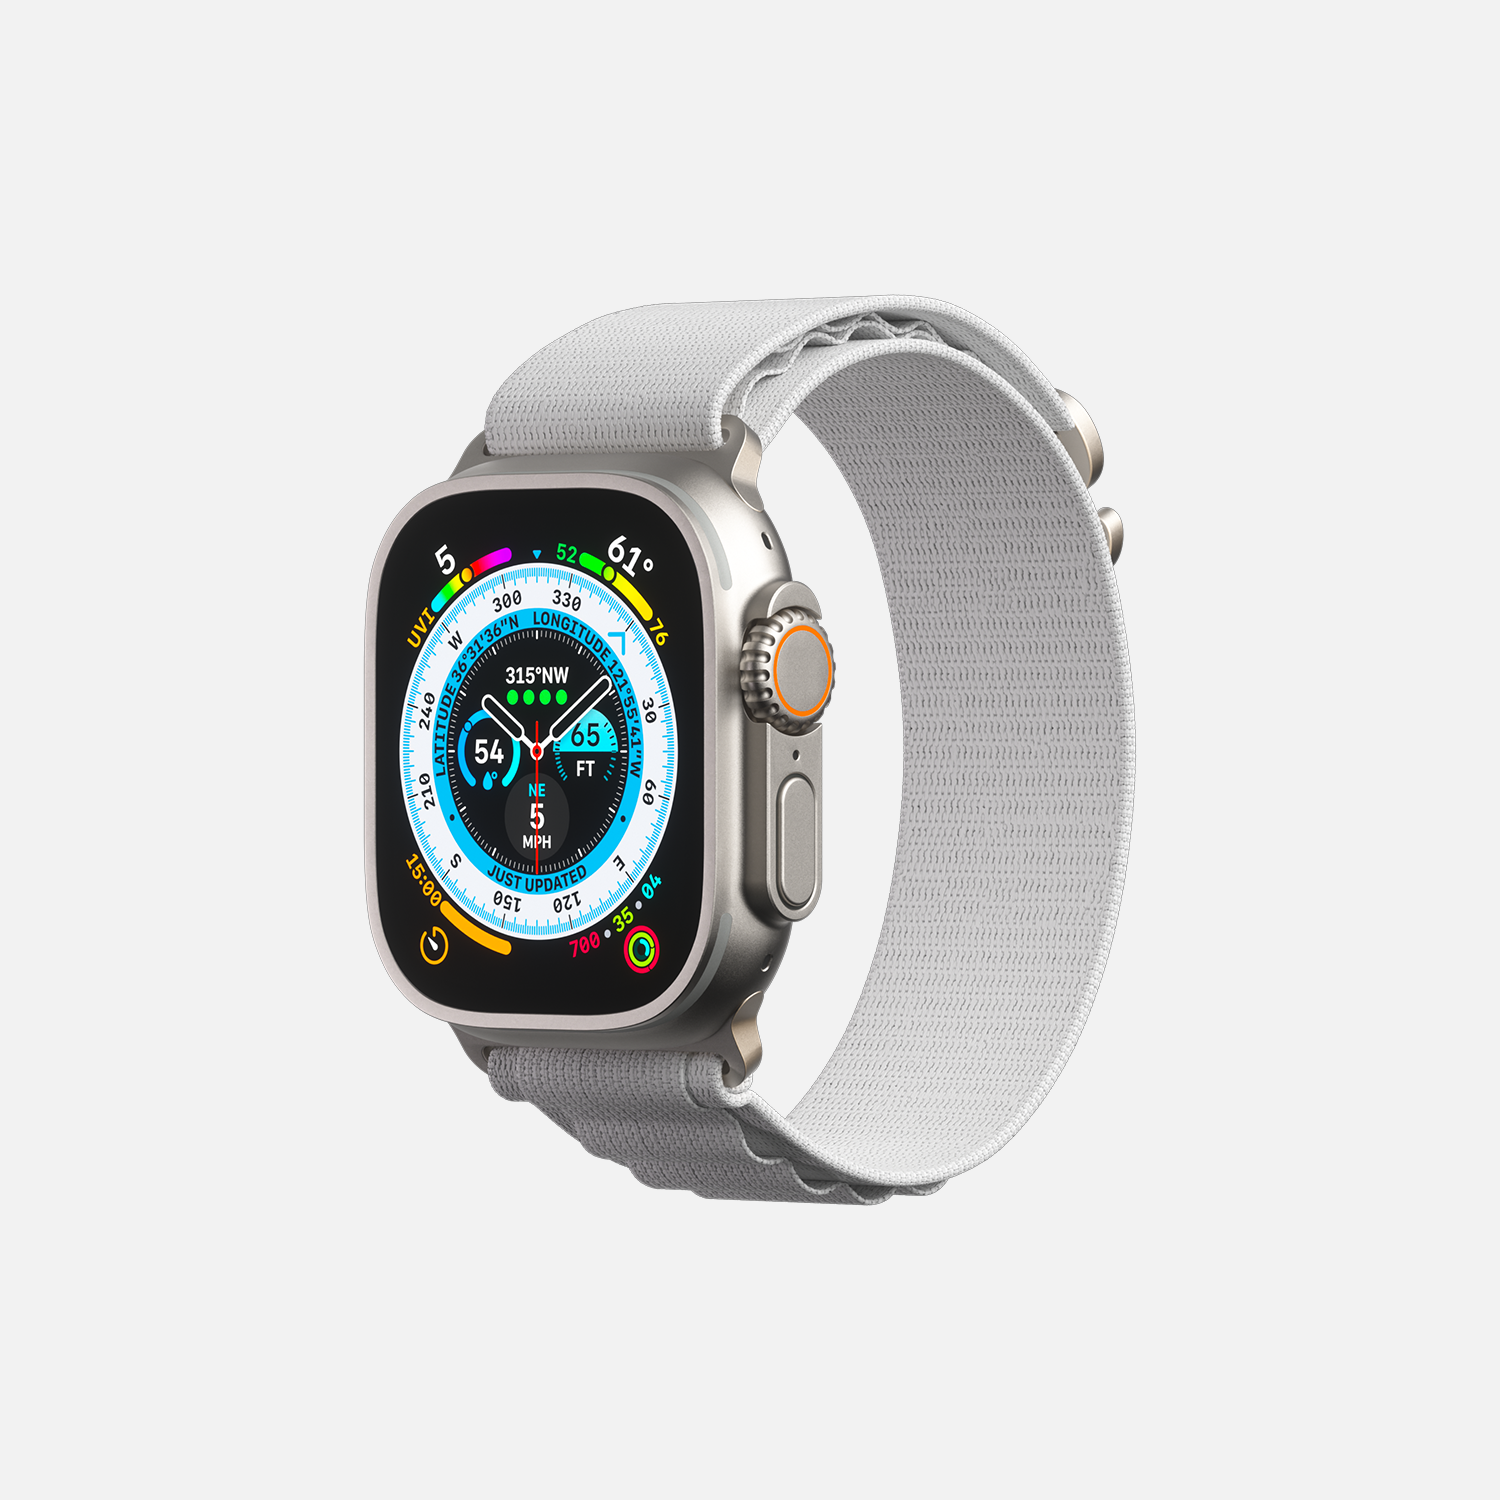 Silver smartwatch with colorful display and white band isolated on white background"